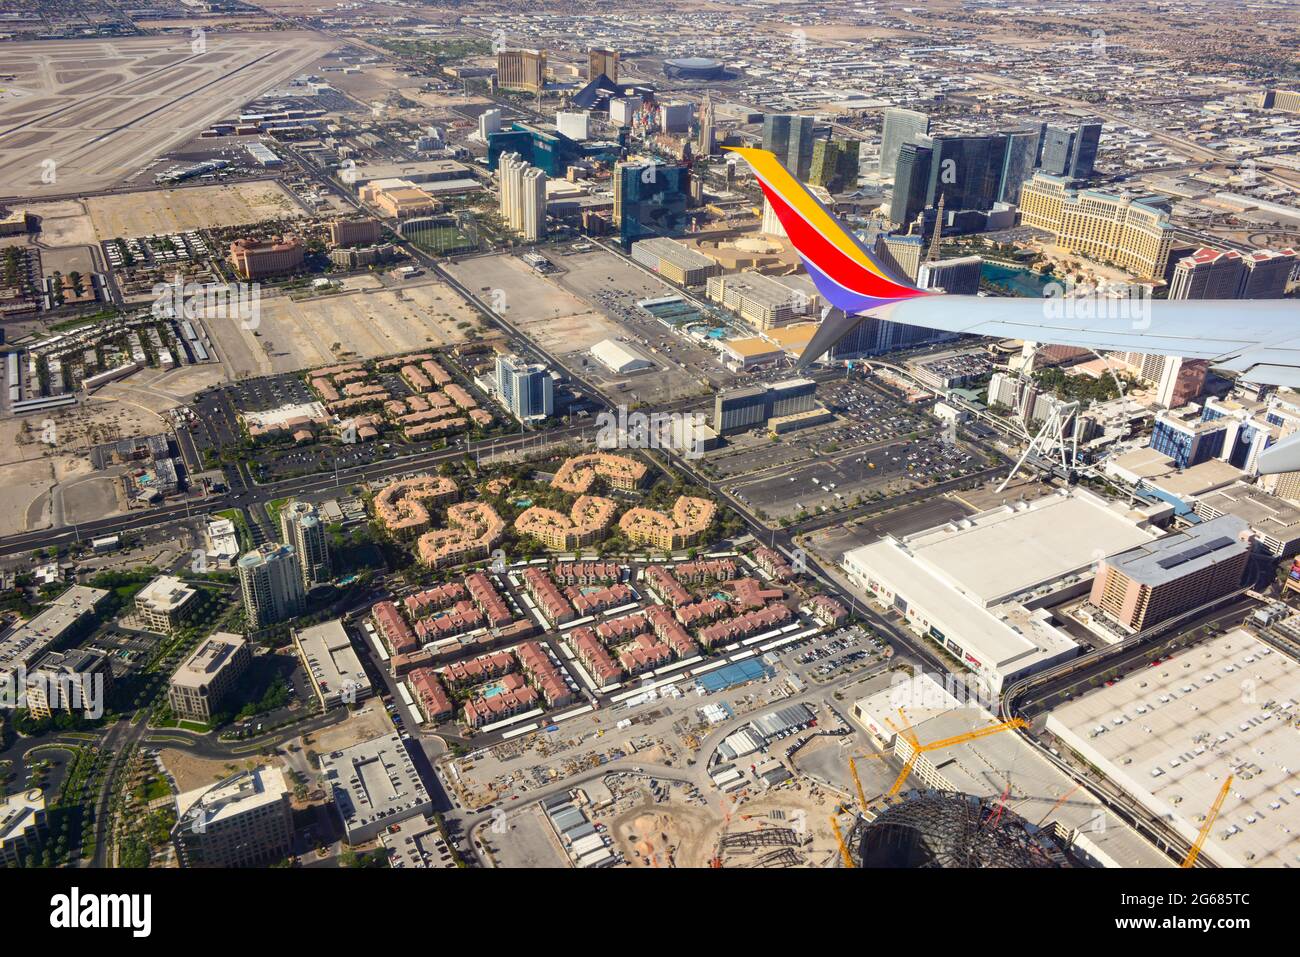 A jet wing tip of an 780 Max airplane in the foreground of an aerial view of the  Vegas strip area soon after liftoff from Las Vegas McCarran Internat Stock Photo